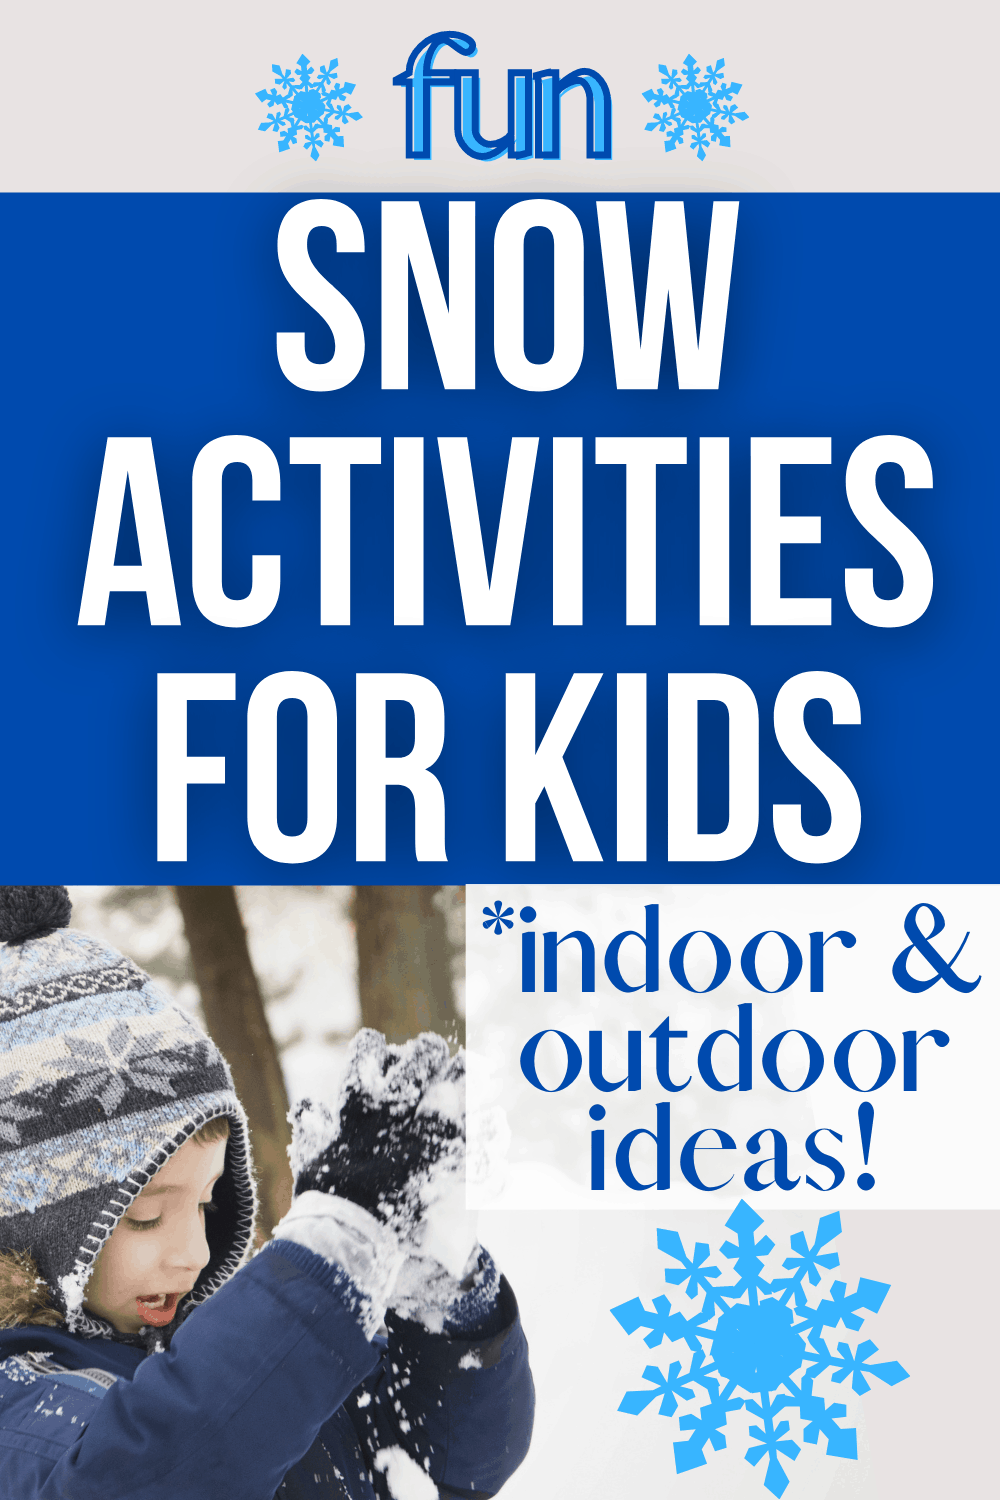 SNOW ACTIVITIES FOR KIDS - text over child playing in the snow for snow day